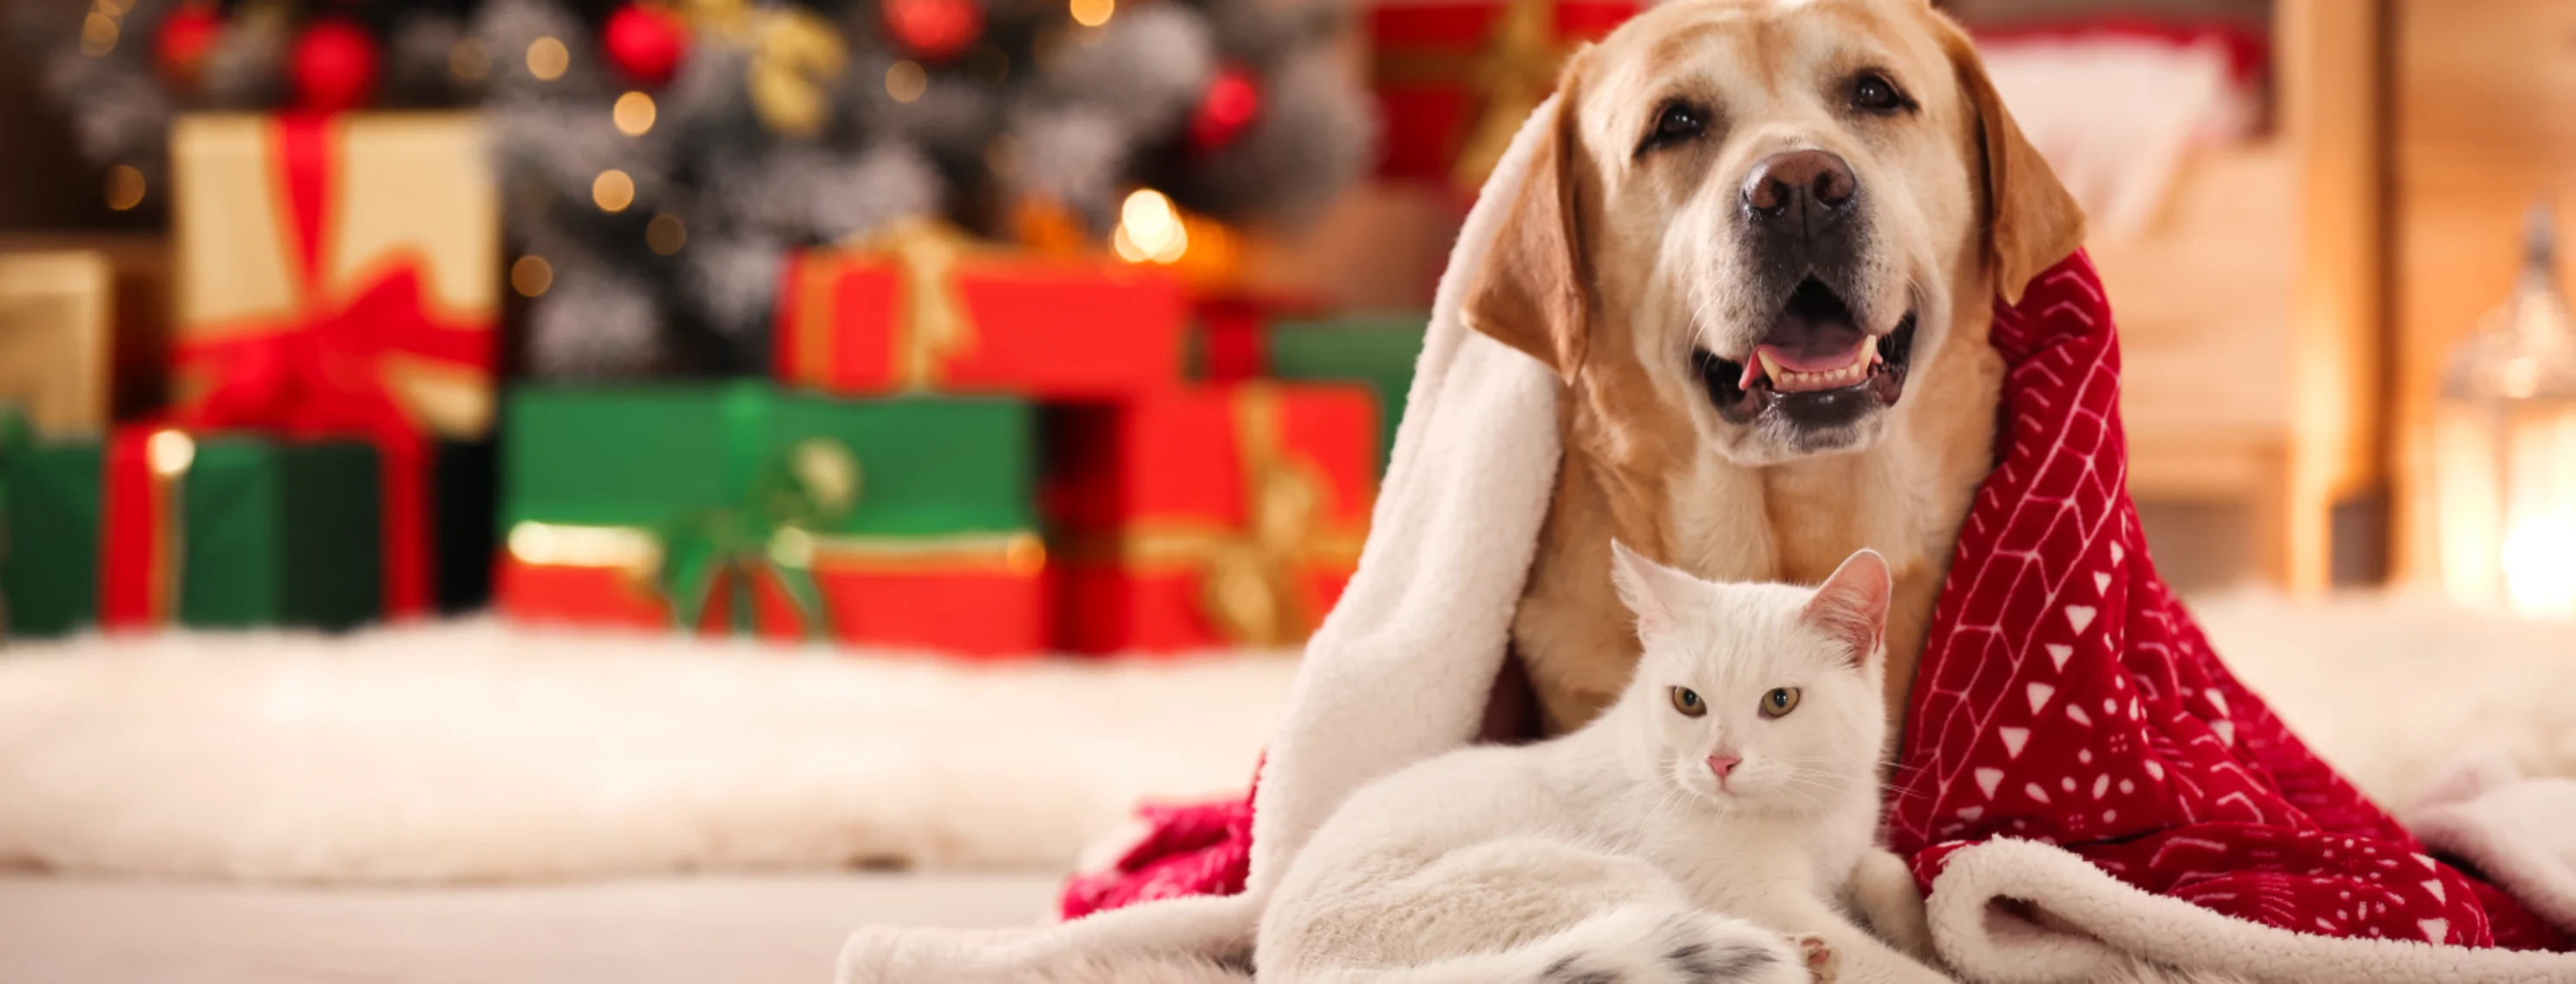 Dog and Cat with a christmas tree in the background